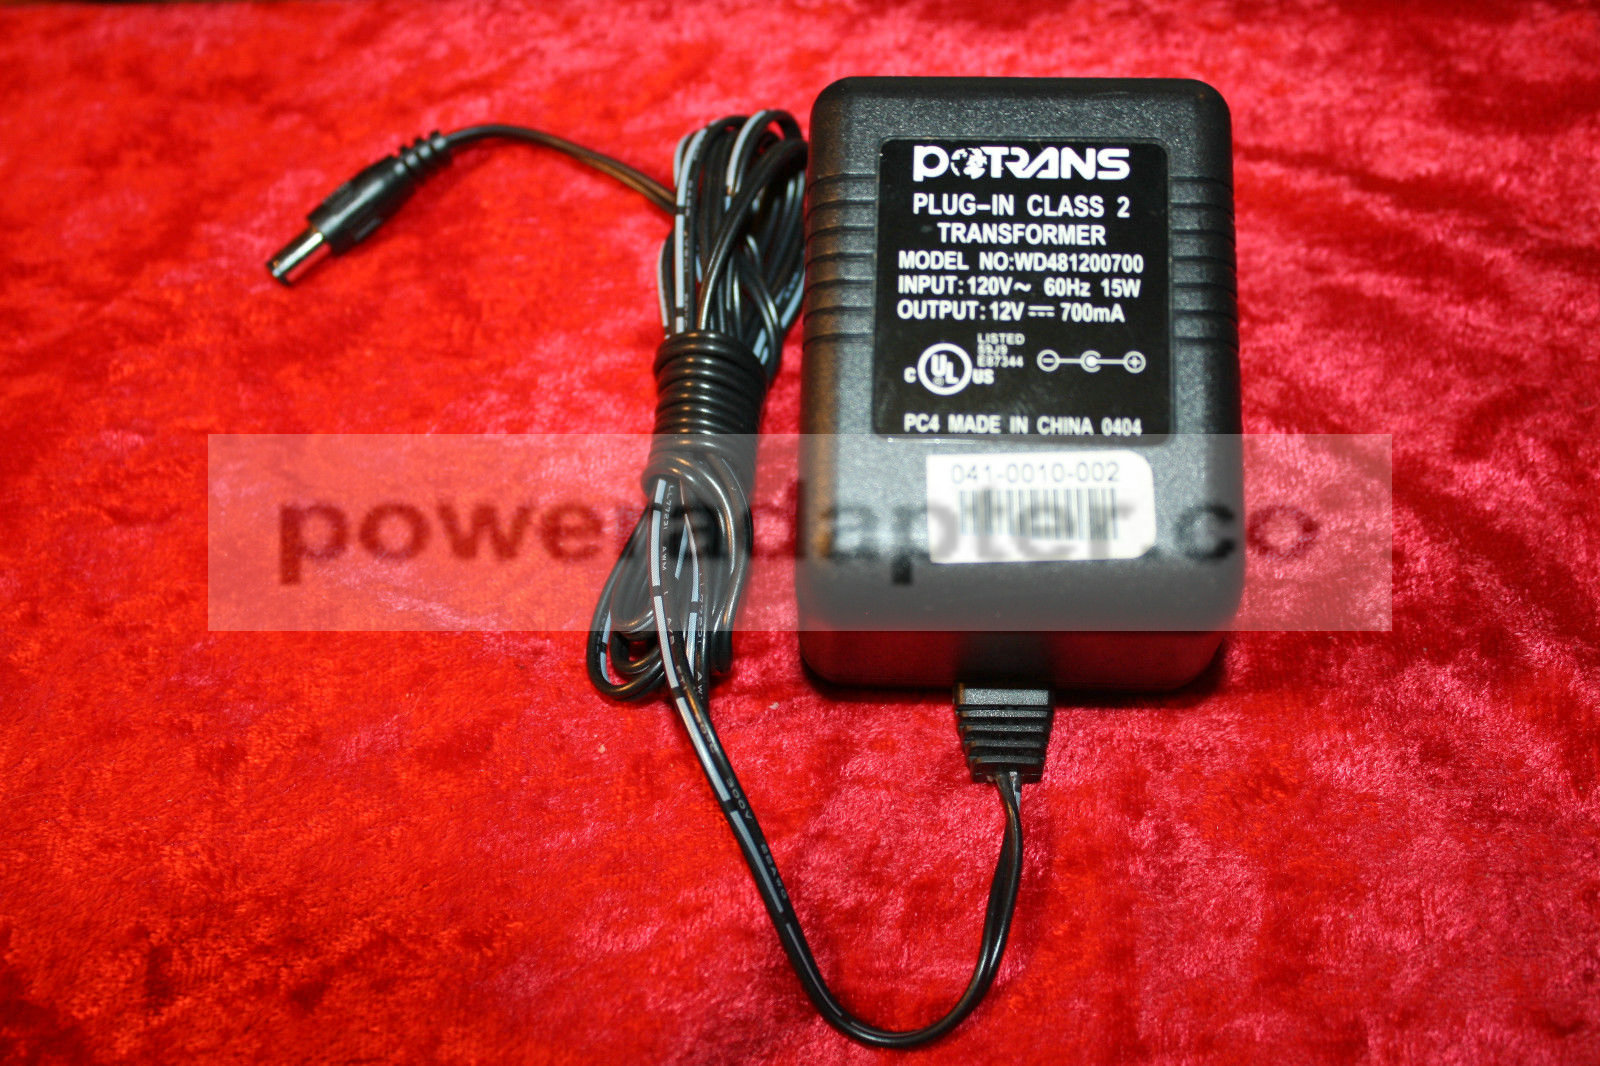 Potrans WD481200700 AC Adapter 12V 700mA - Fully Tested! Condition: Used: An item that has been used previously. The - Click Image to Close